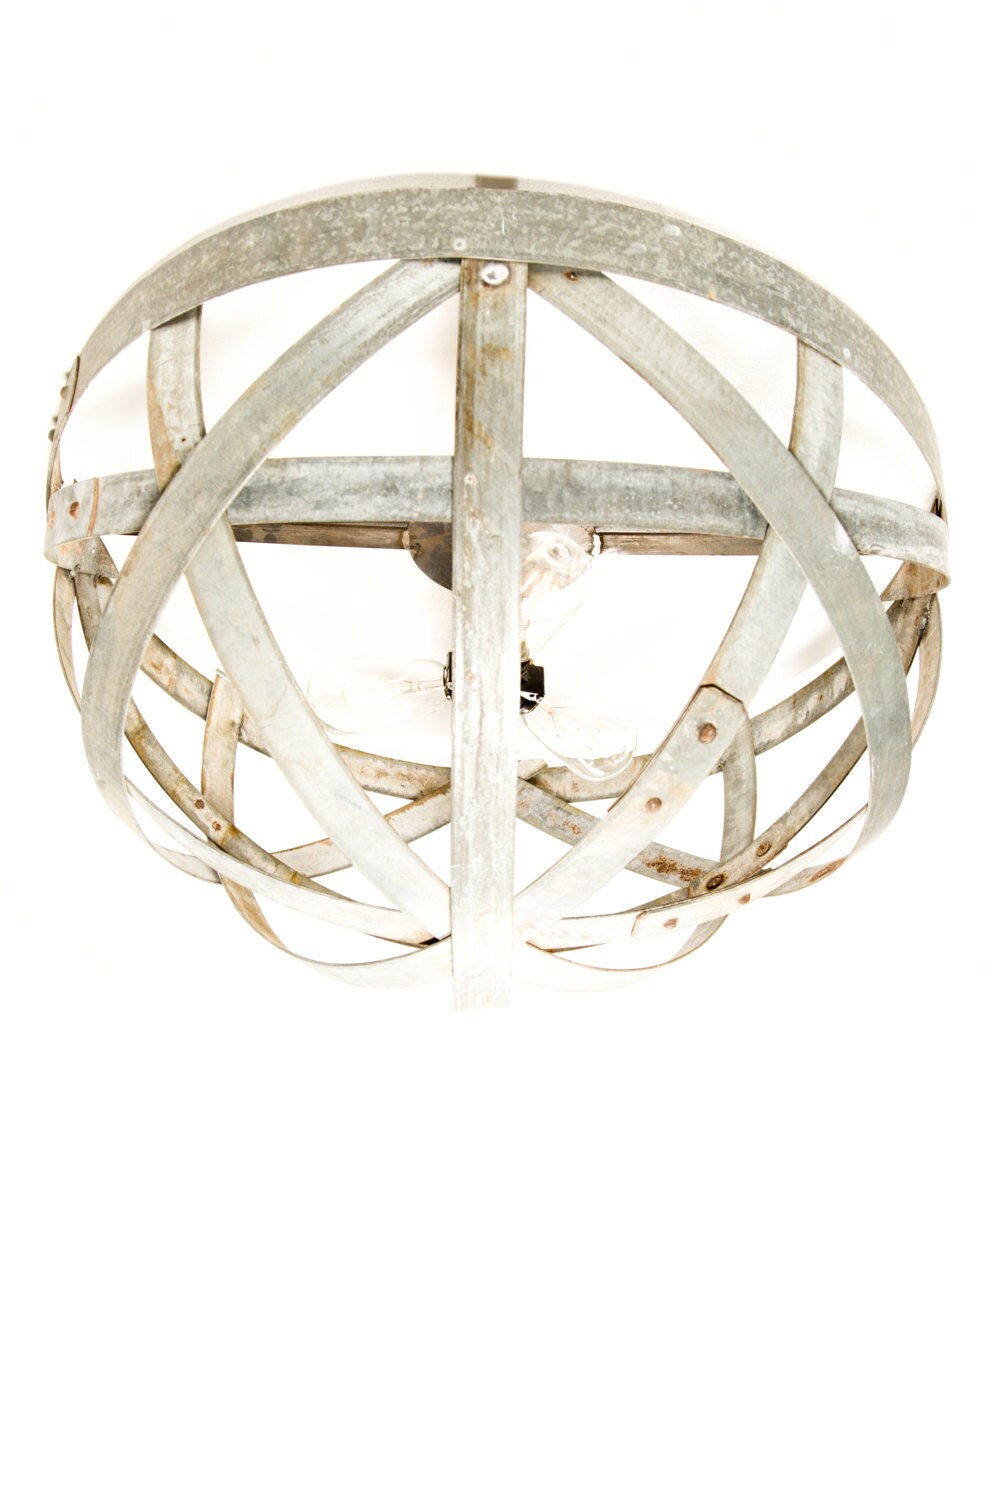 Wine Barrel Ring Flush Mount Ceiling Light - Orbis - Made from retired CA wine barrel rings. 100% Recycled!